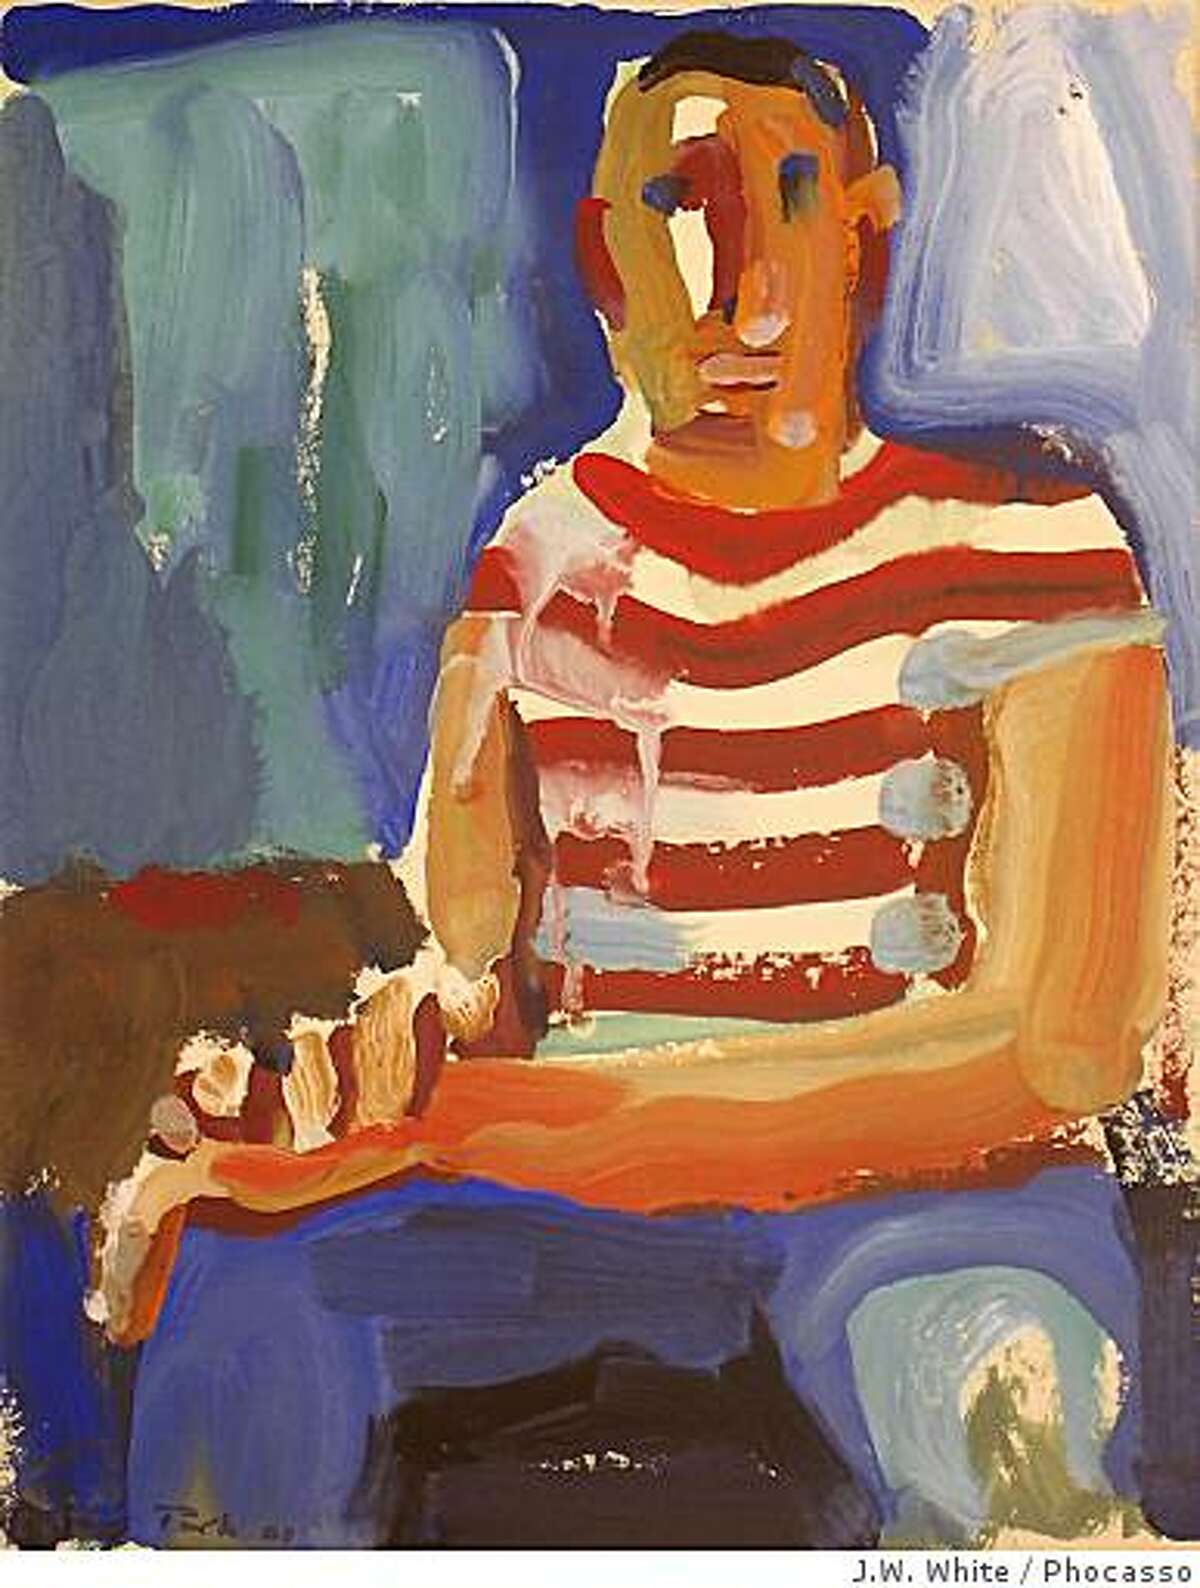 "Seated Man" (1960) gouache on paper by David Park15" x 11.5"